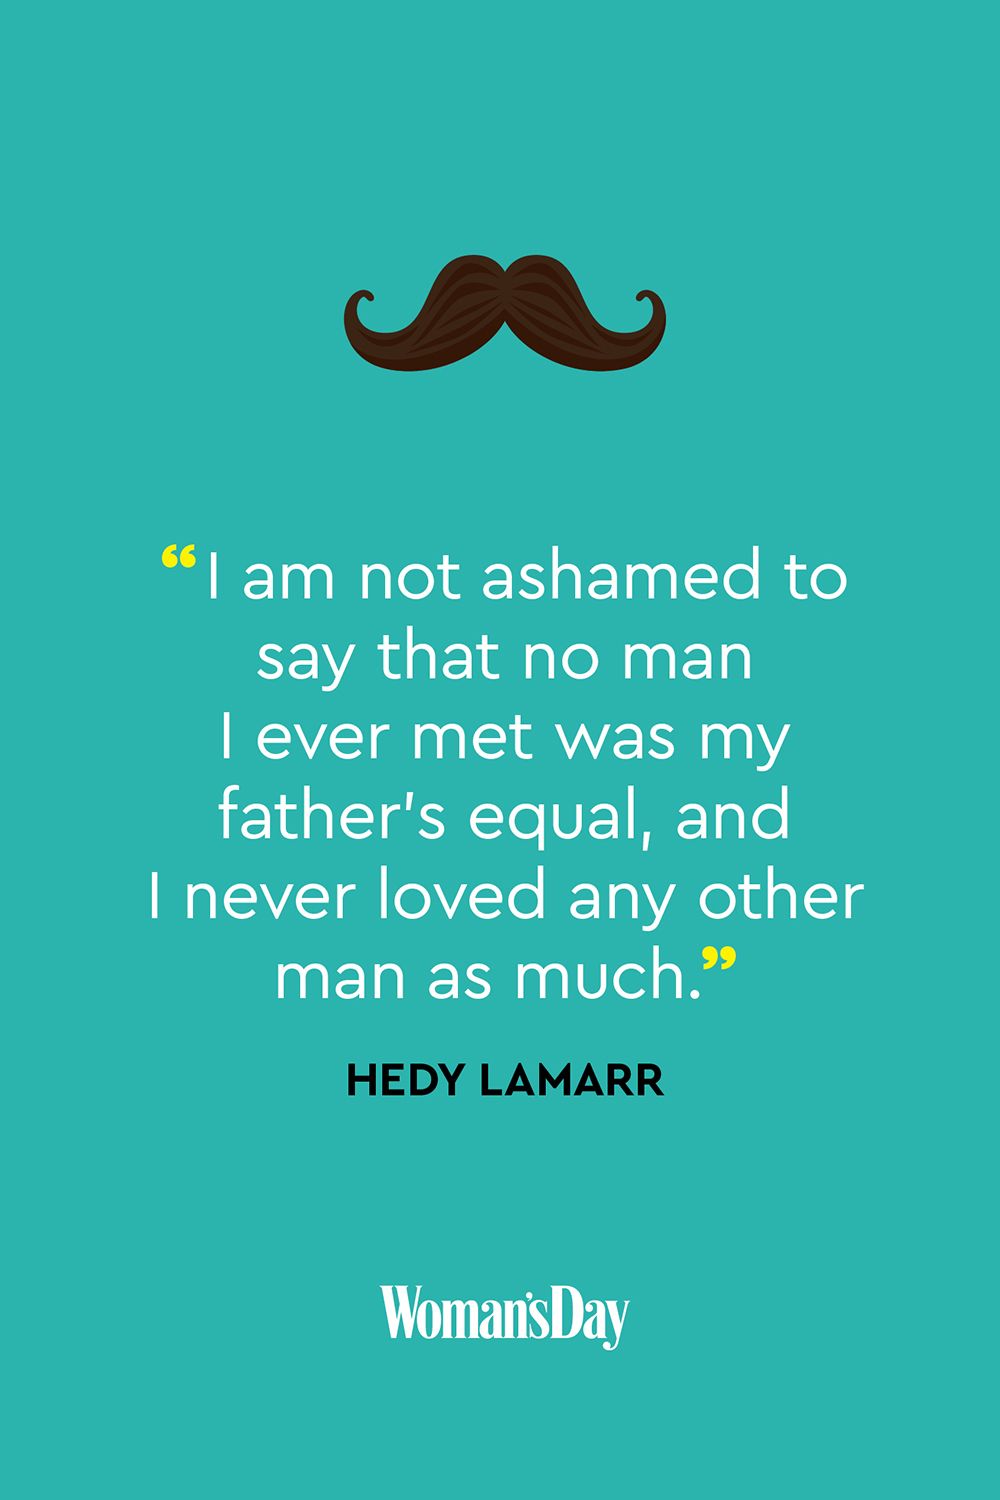 i am not ashamed to say that no man i ever met was my father’s equal and i never loved any other man as much. hedy lamarr